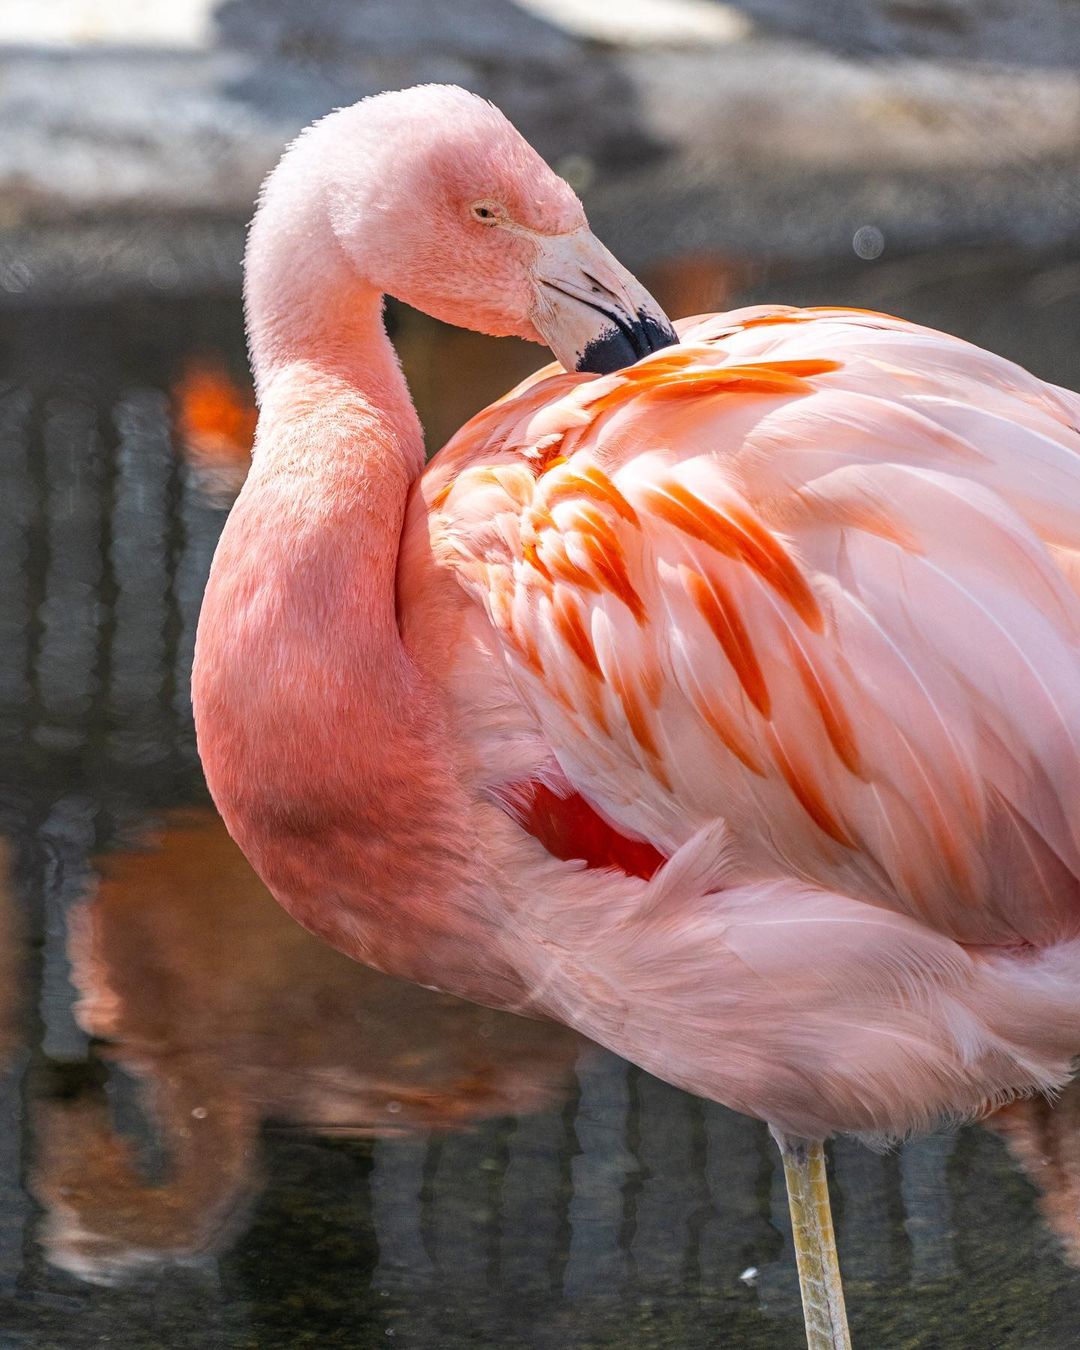 A flamingo in Roger Williams Park Zoo. Photo by Instagram user @carlytookthispic